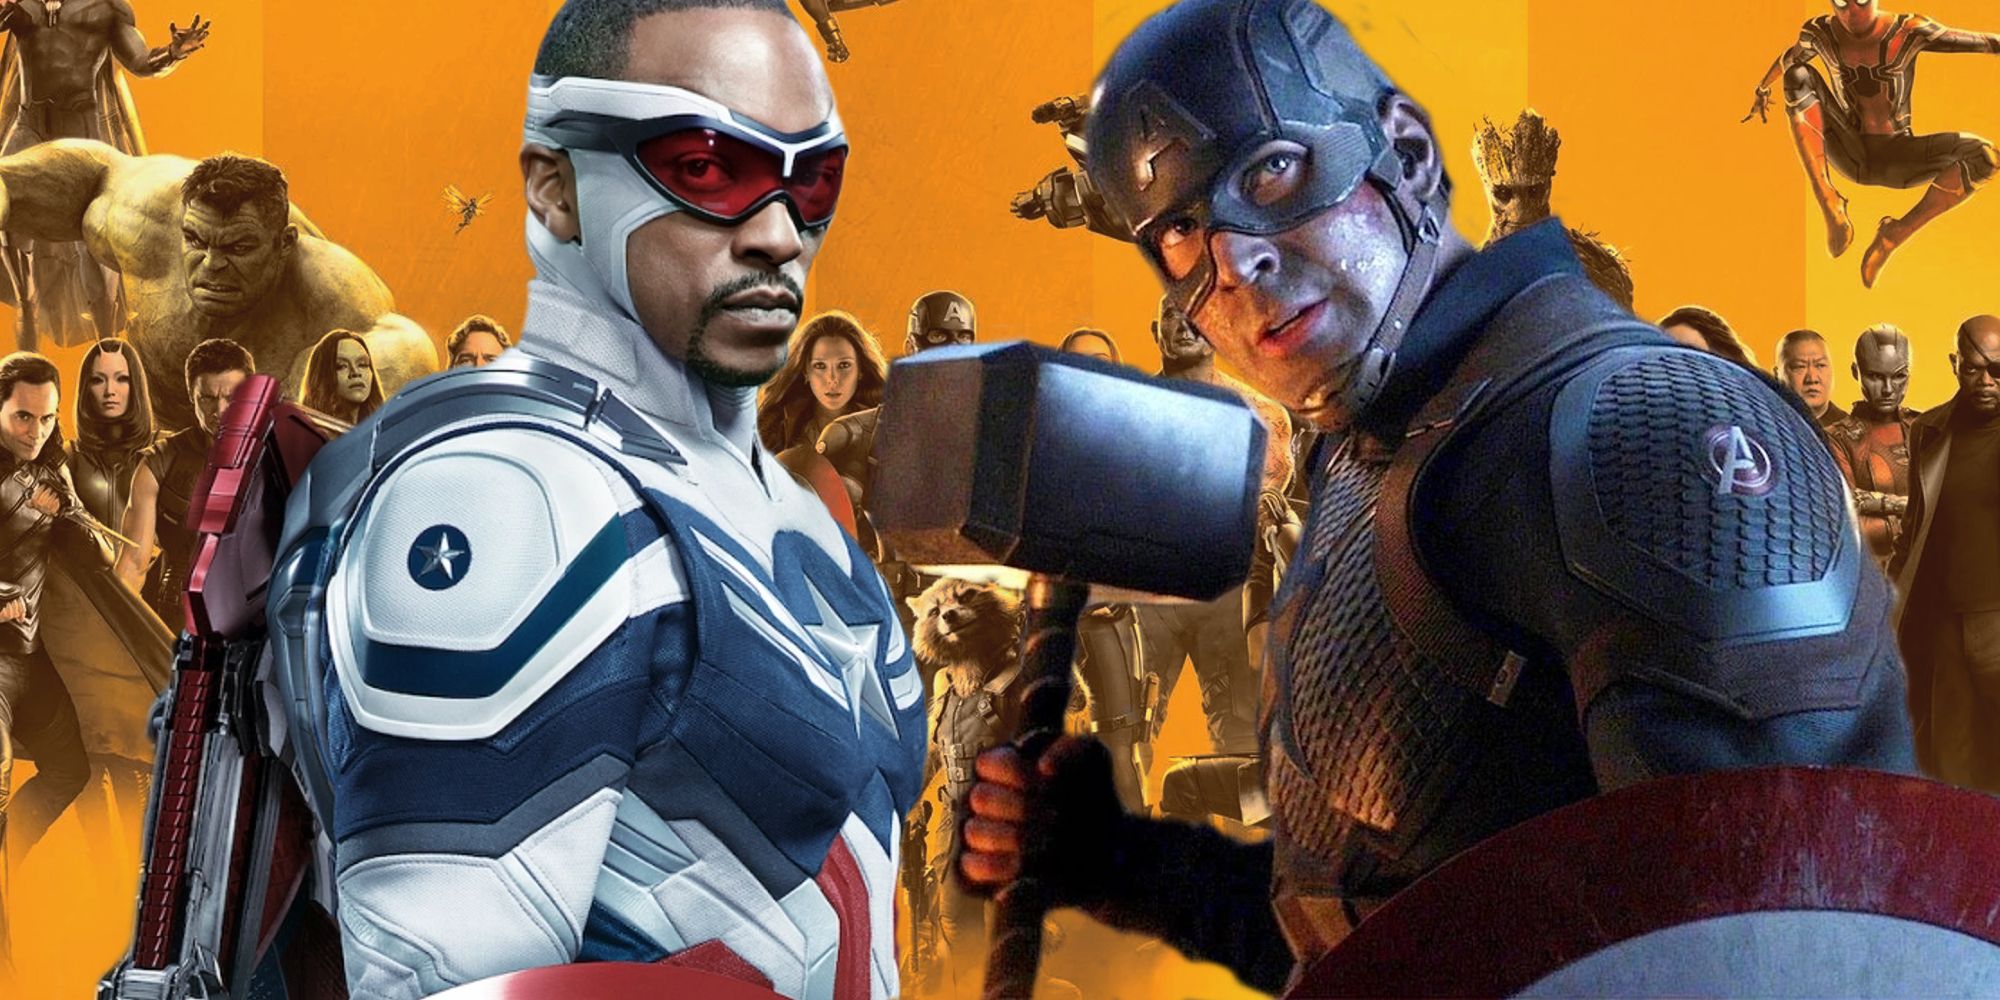 10 Captain America Marvel Comics Moments The MCU Recreated To Great Effect